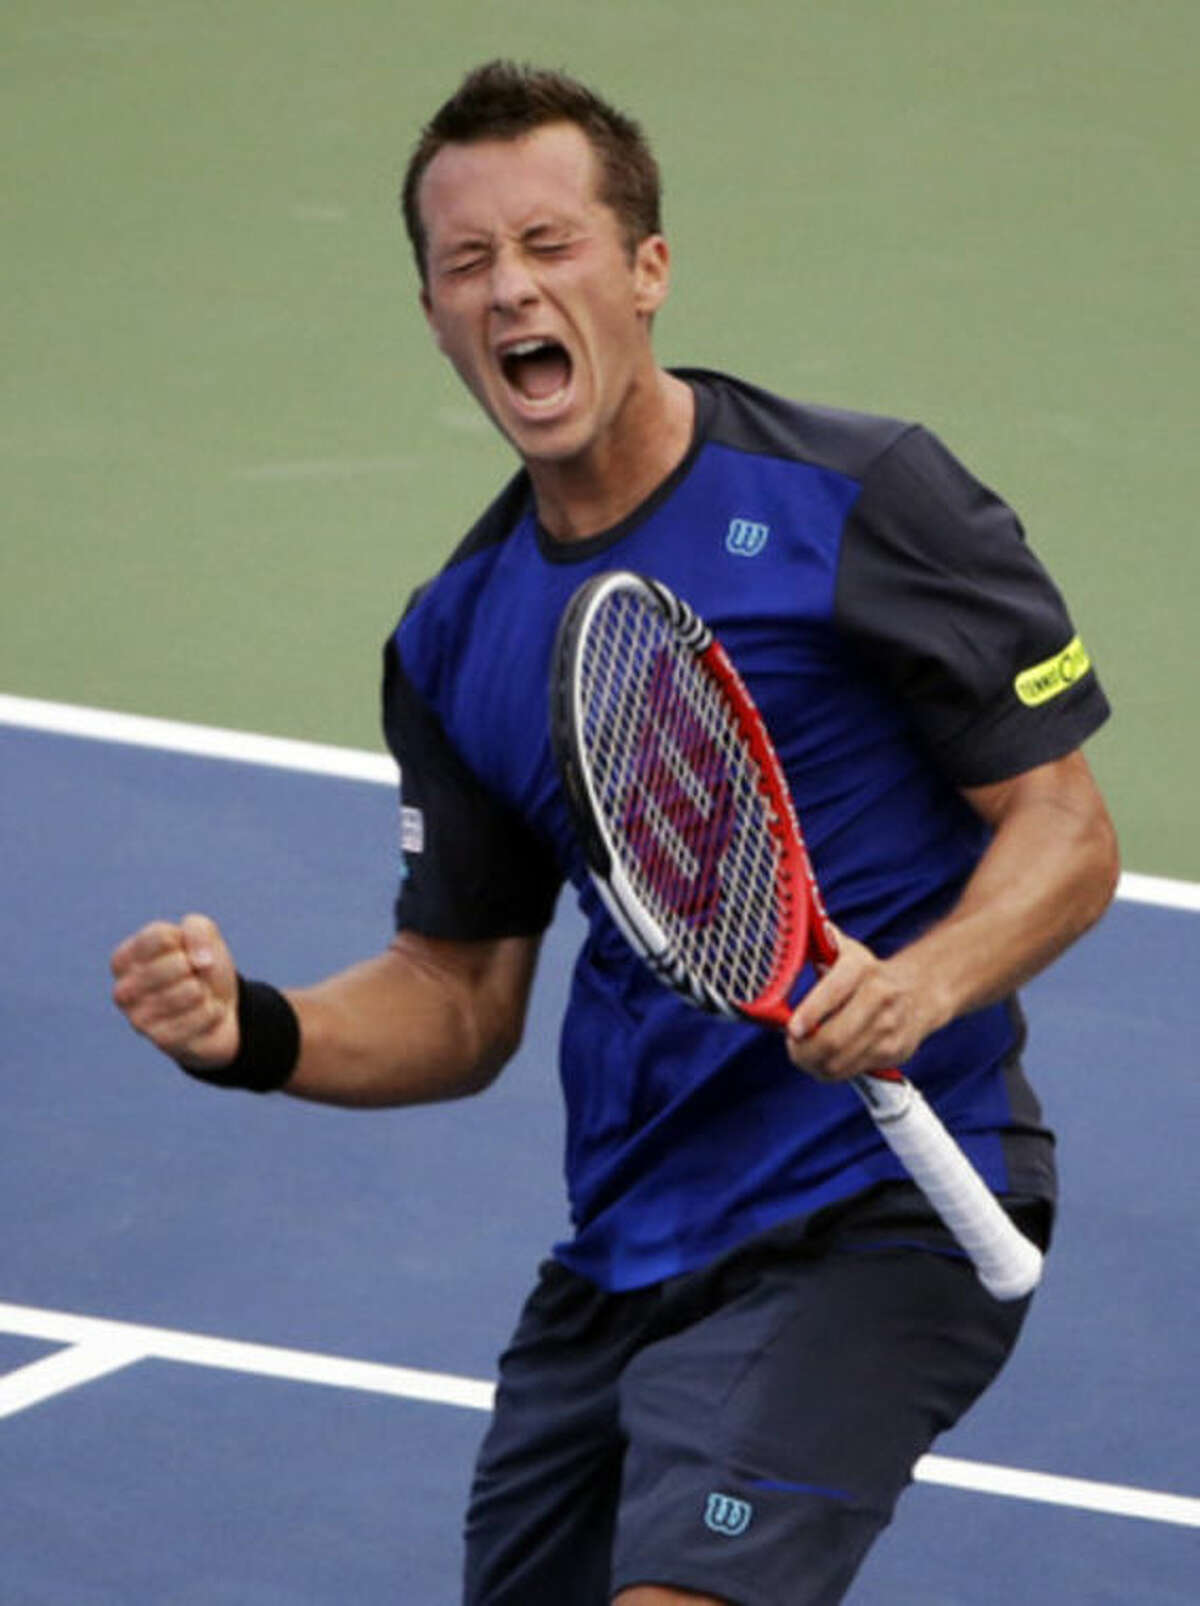 Philipp Kohlschreiber, of Germany, celebrates after beating John Isner during the third round of the 2013 U.S. Open tennis tournament, Saturday, Aug. 31, 2013, in New York. (AP Photo/David Goldman)